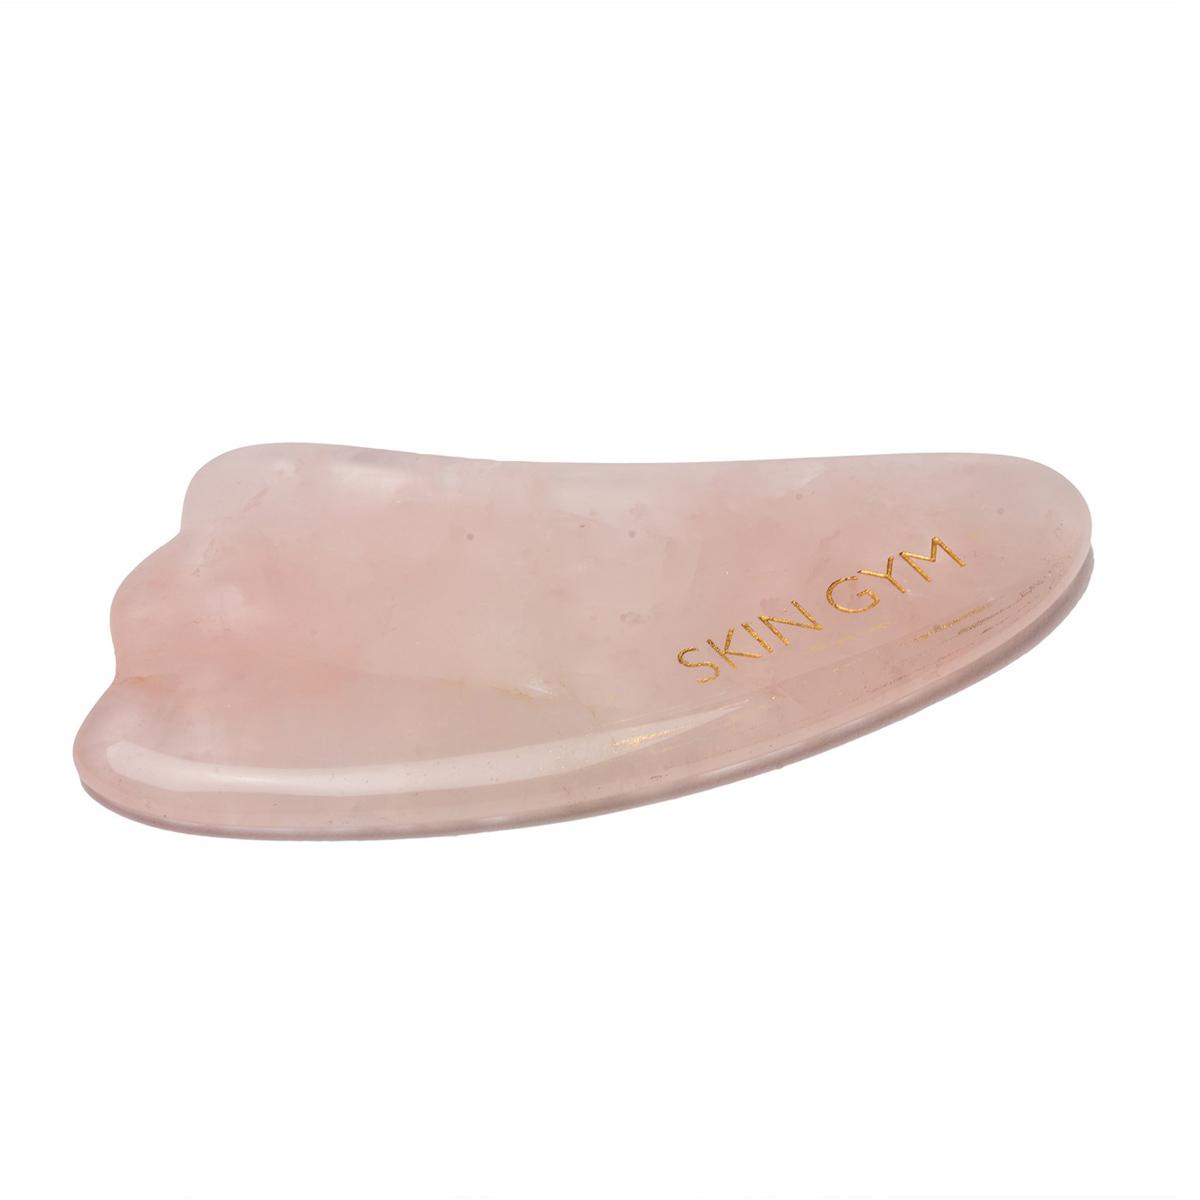 Primary image of Rose Gua Sha Sculpty